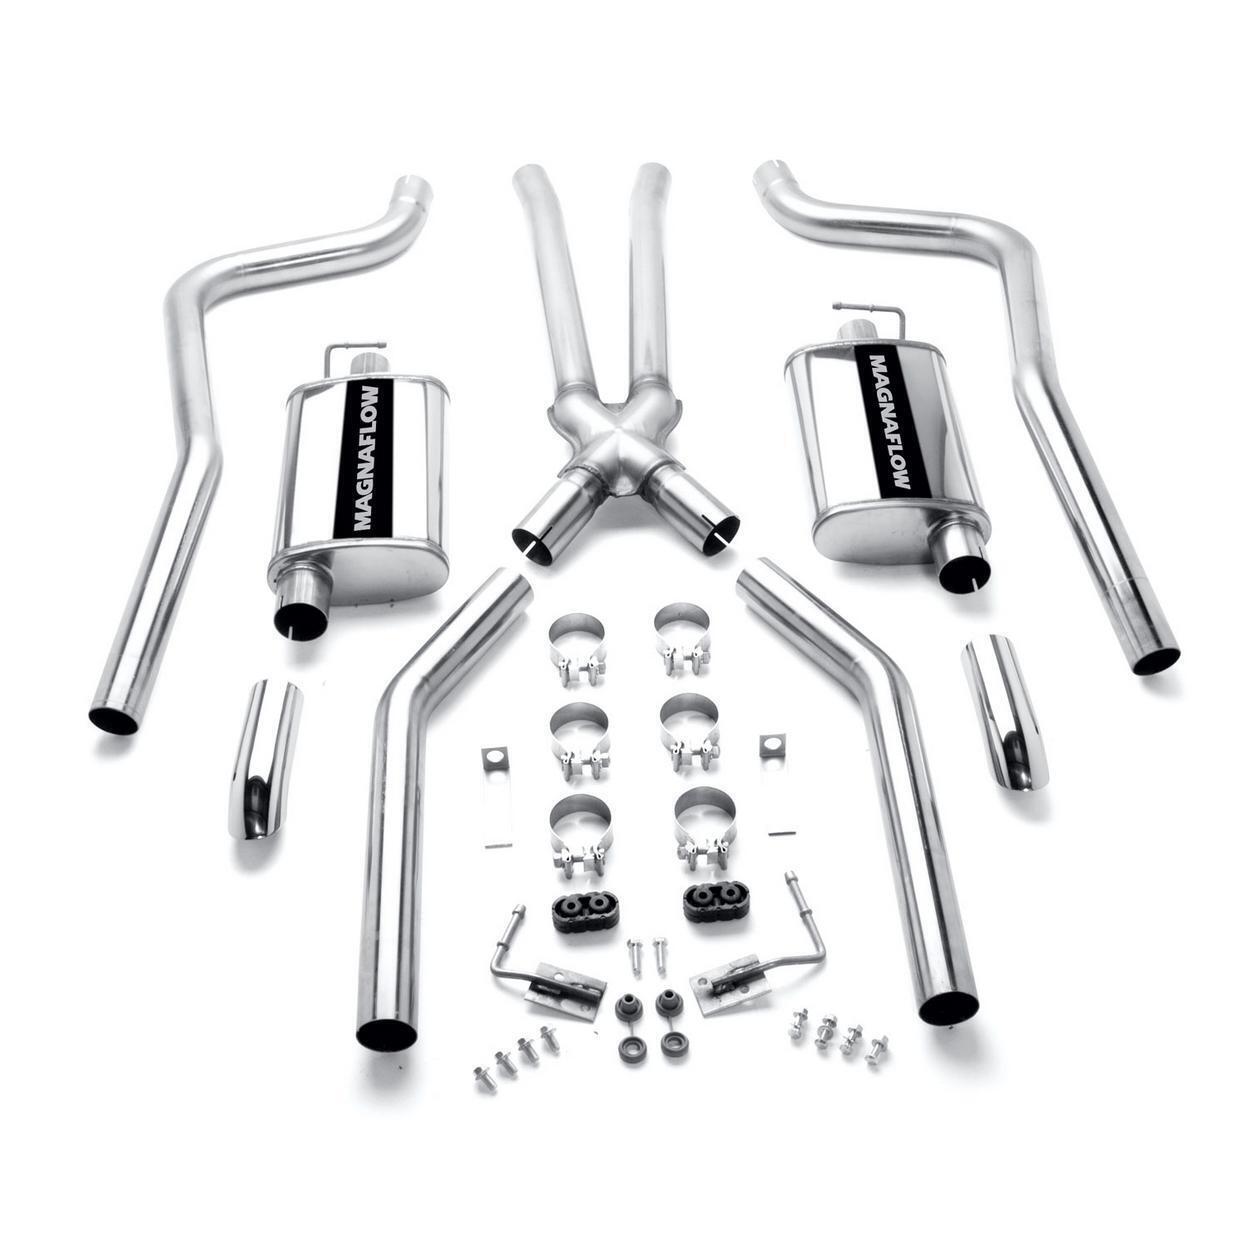 Magnaflow Exhaust System Kit for 1970 Plymouth Barracuda 3.2L L6 GAS OHV